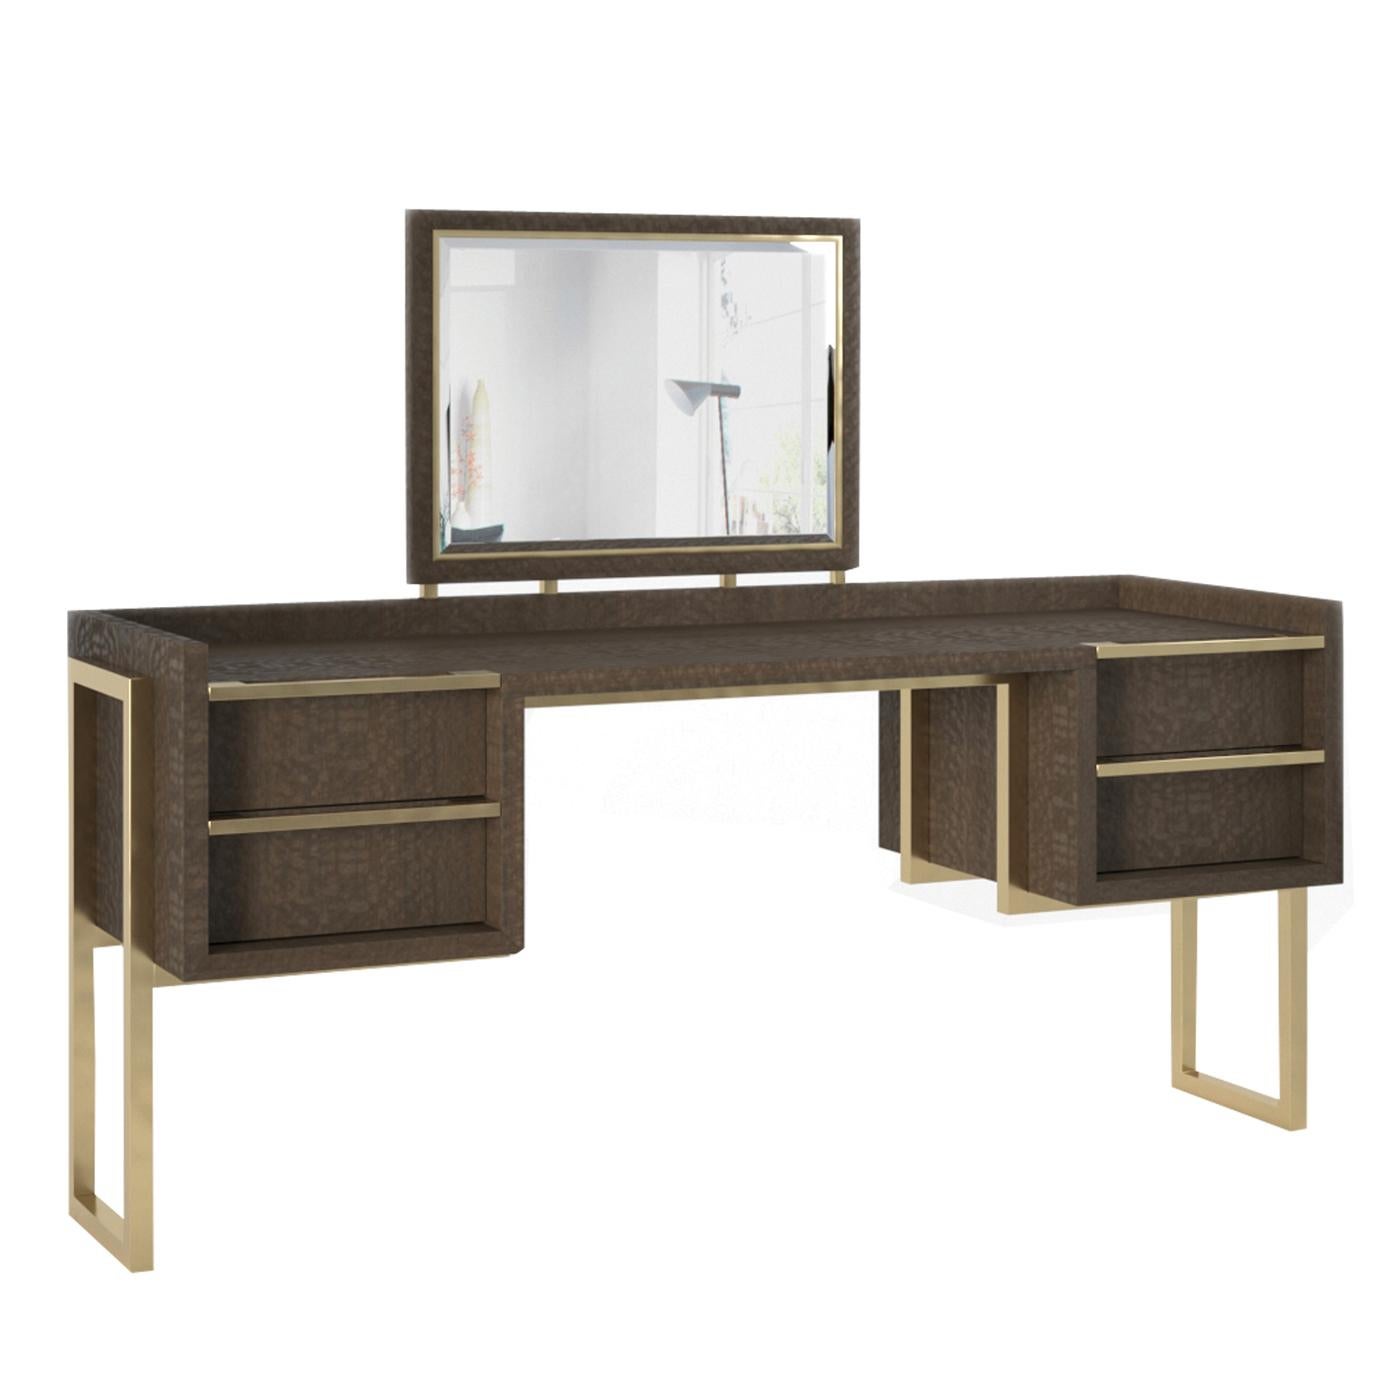 Equipped with a wide rectangular mirror, this modern vanity table will imbue a room with a sophisticated and elegant allure. Its dark brown wooden structure comprises a central mirror, four handy drawers, and a smooth top, sustained by two airy